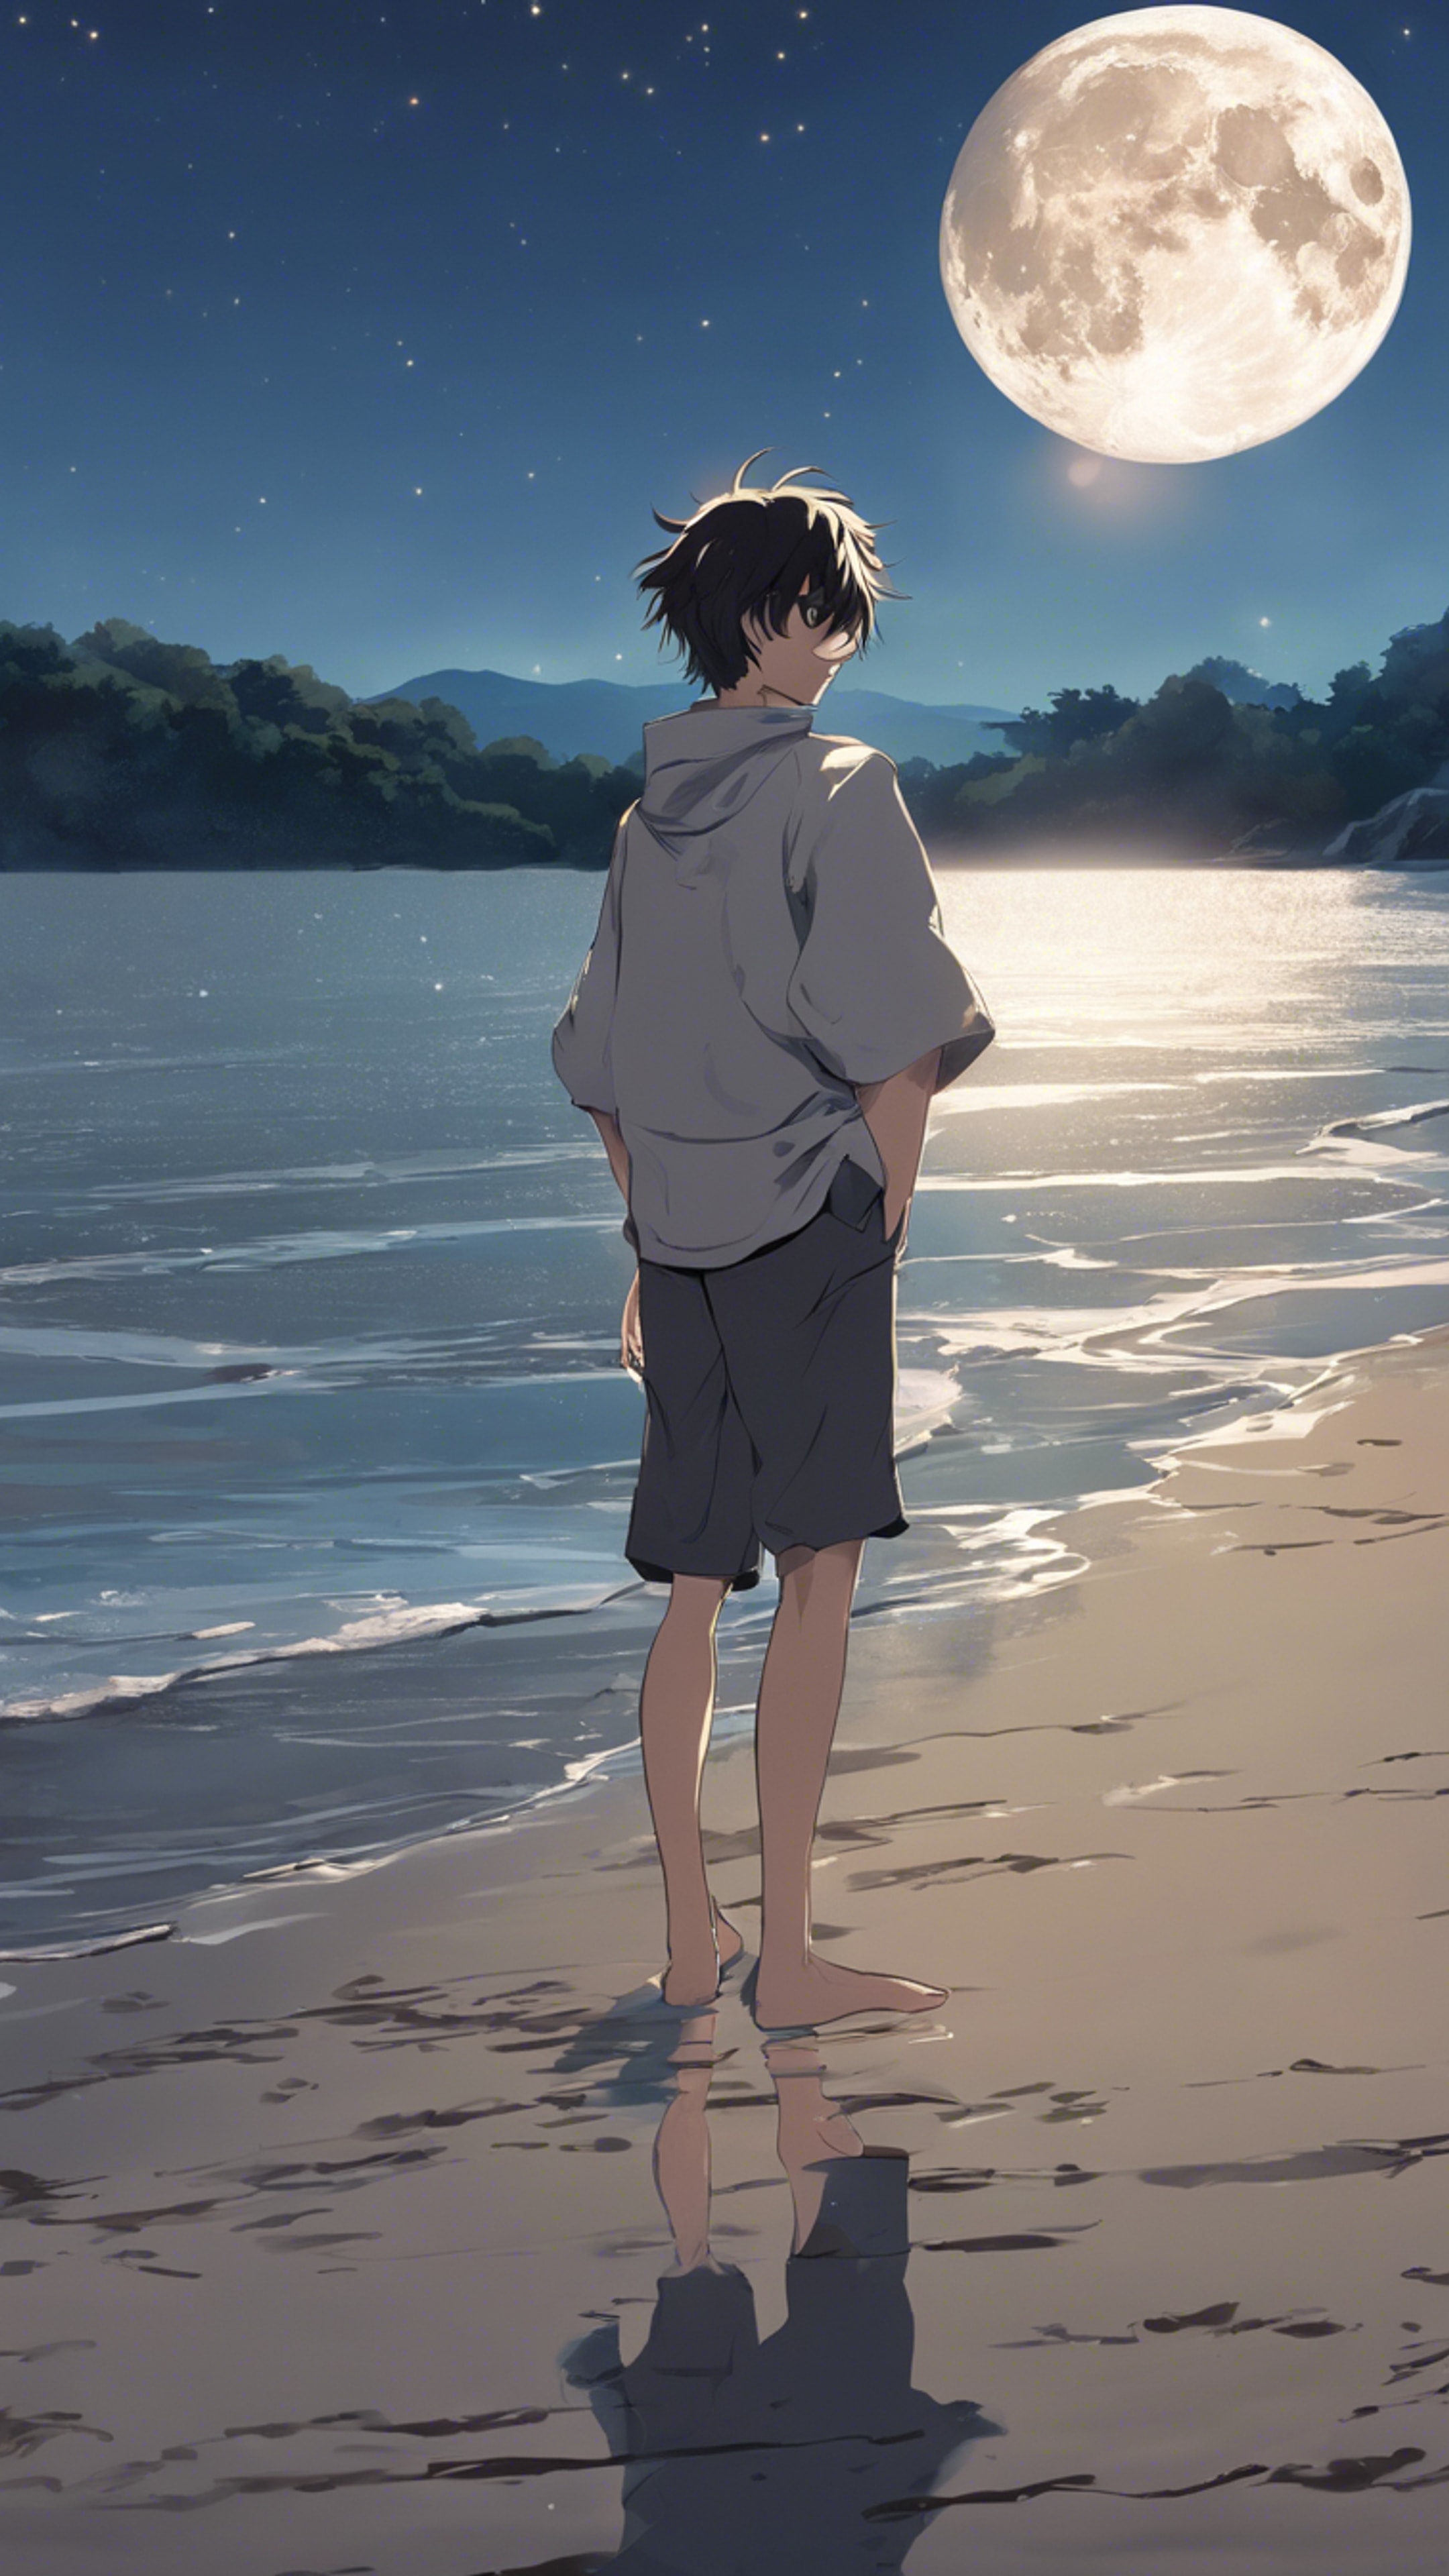 An anime boy standing barefoot on the shore, with the moon reflecting in upturned, joyous eyes. کاغذ دیواری[a80f9c3e465041ad9759]